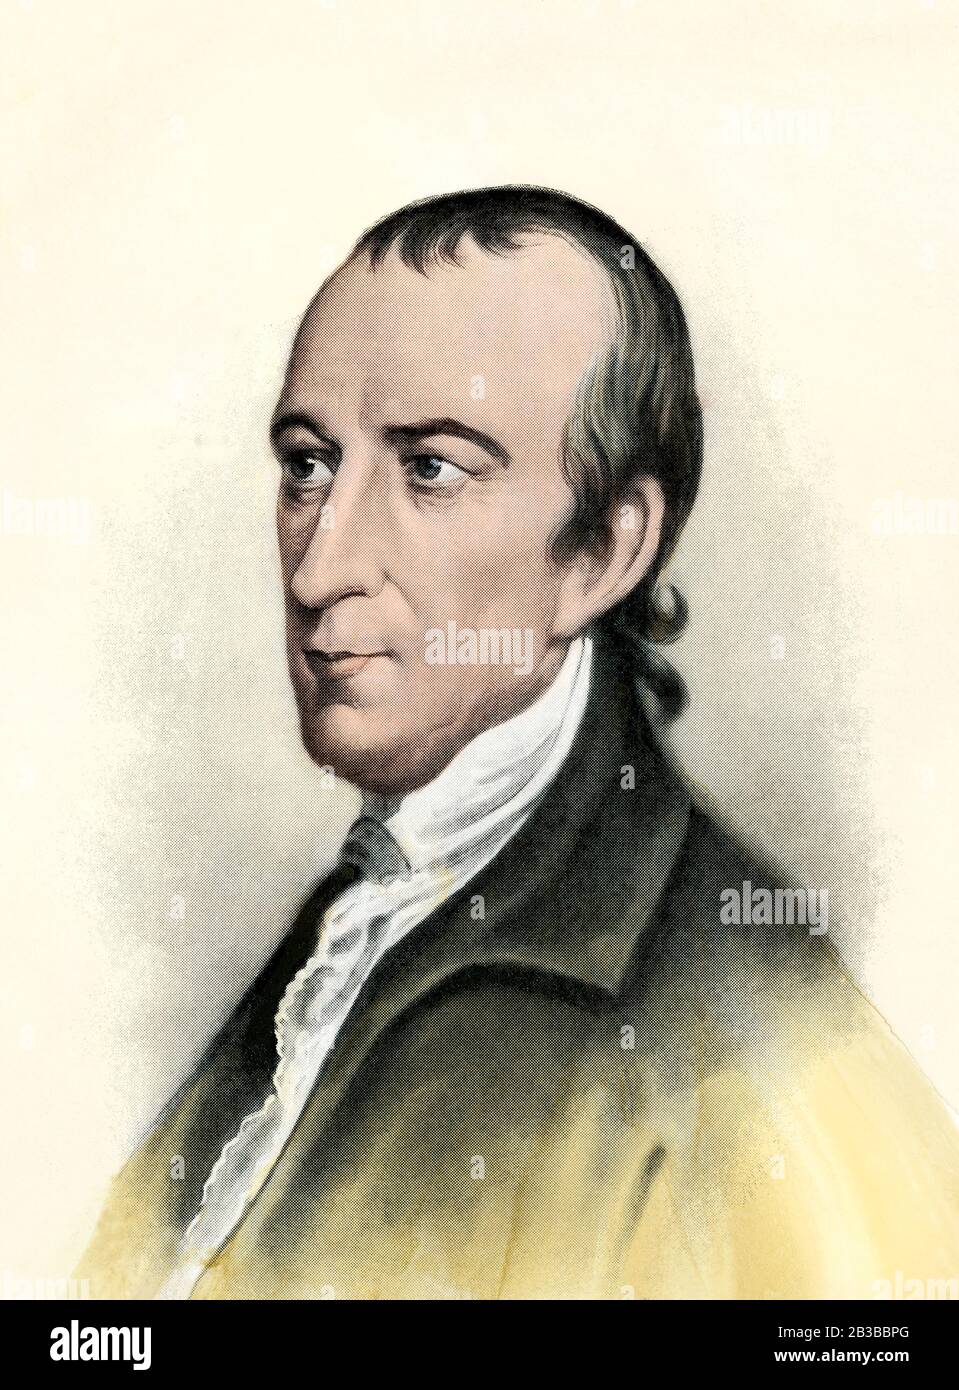 Thomas Stone, signer of the Declaration of Independence. Hand-colored halftone of an illustration Stock Photo